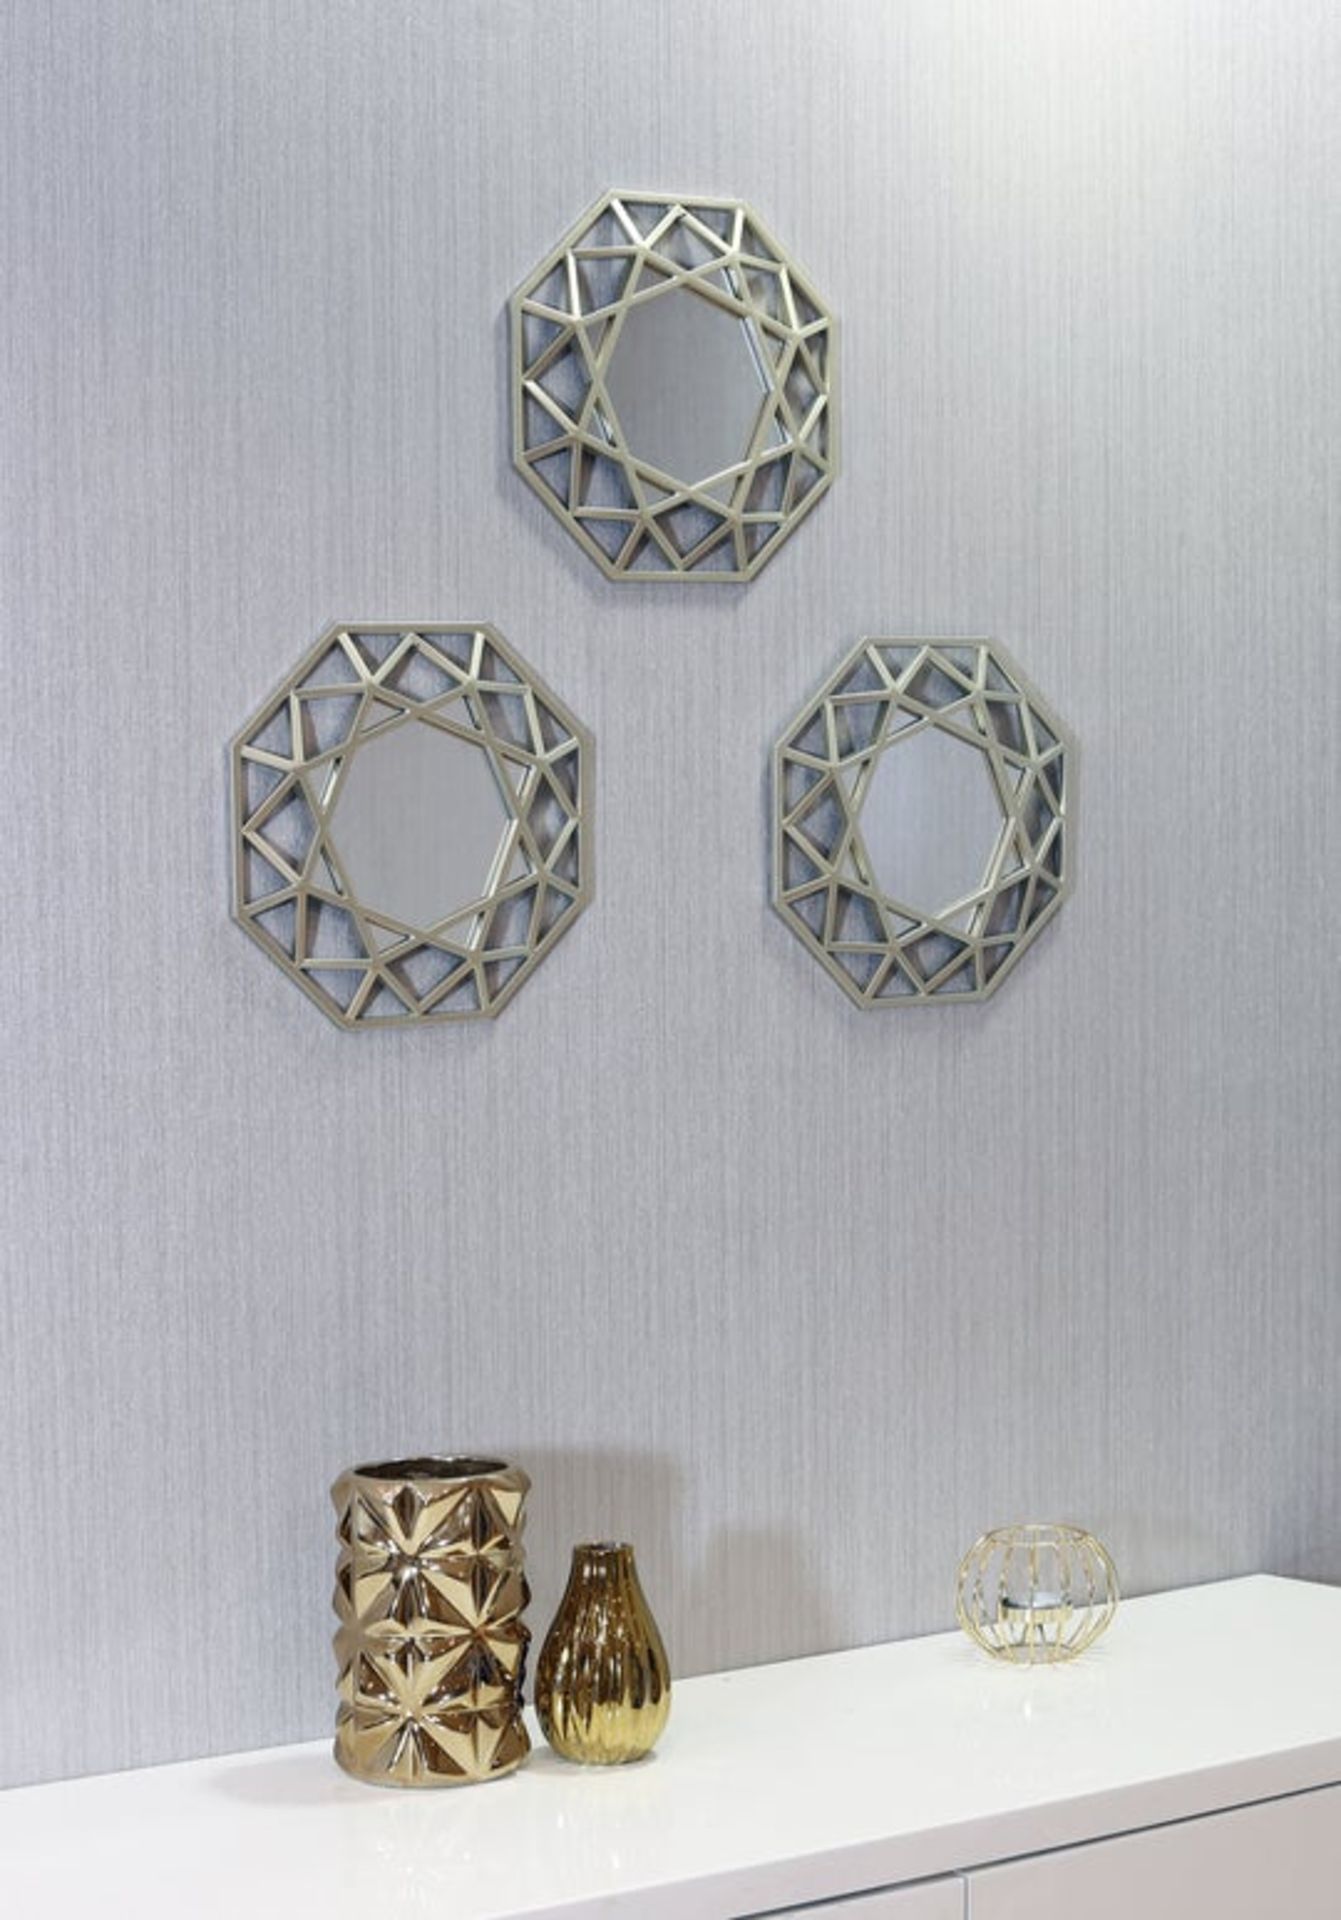 Arthouse Octagon Mirrors (set of 3) - RRP £35.99 - Image 2 of 3